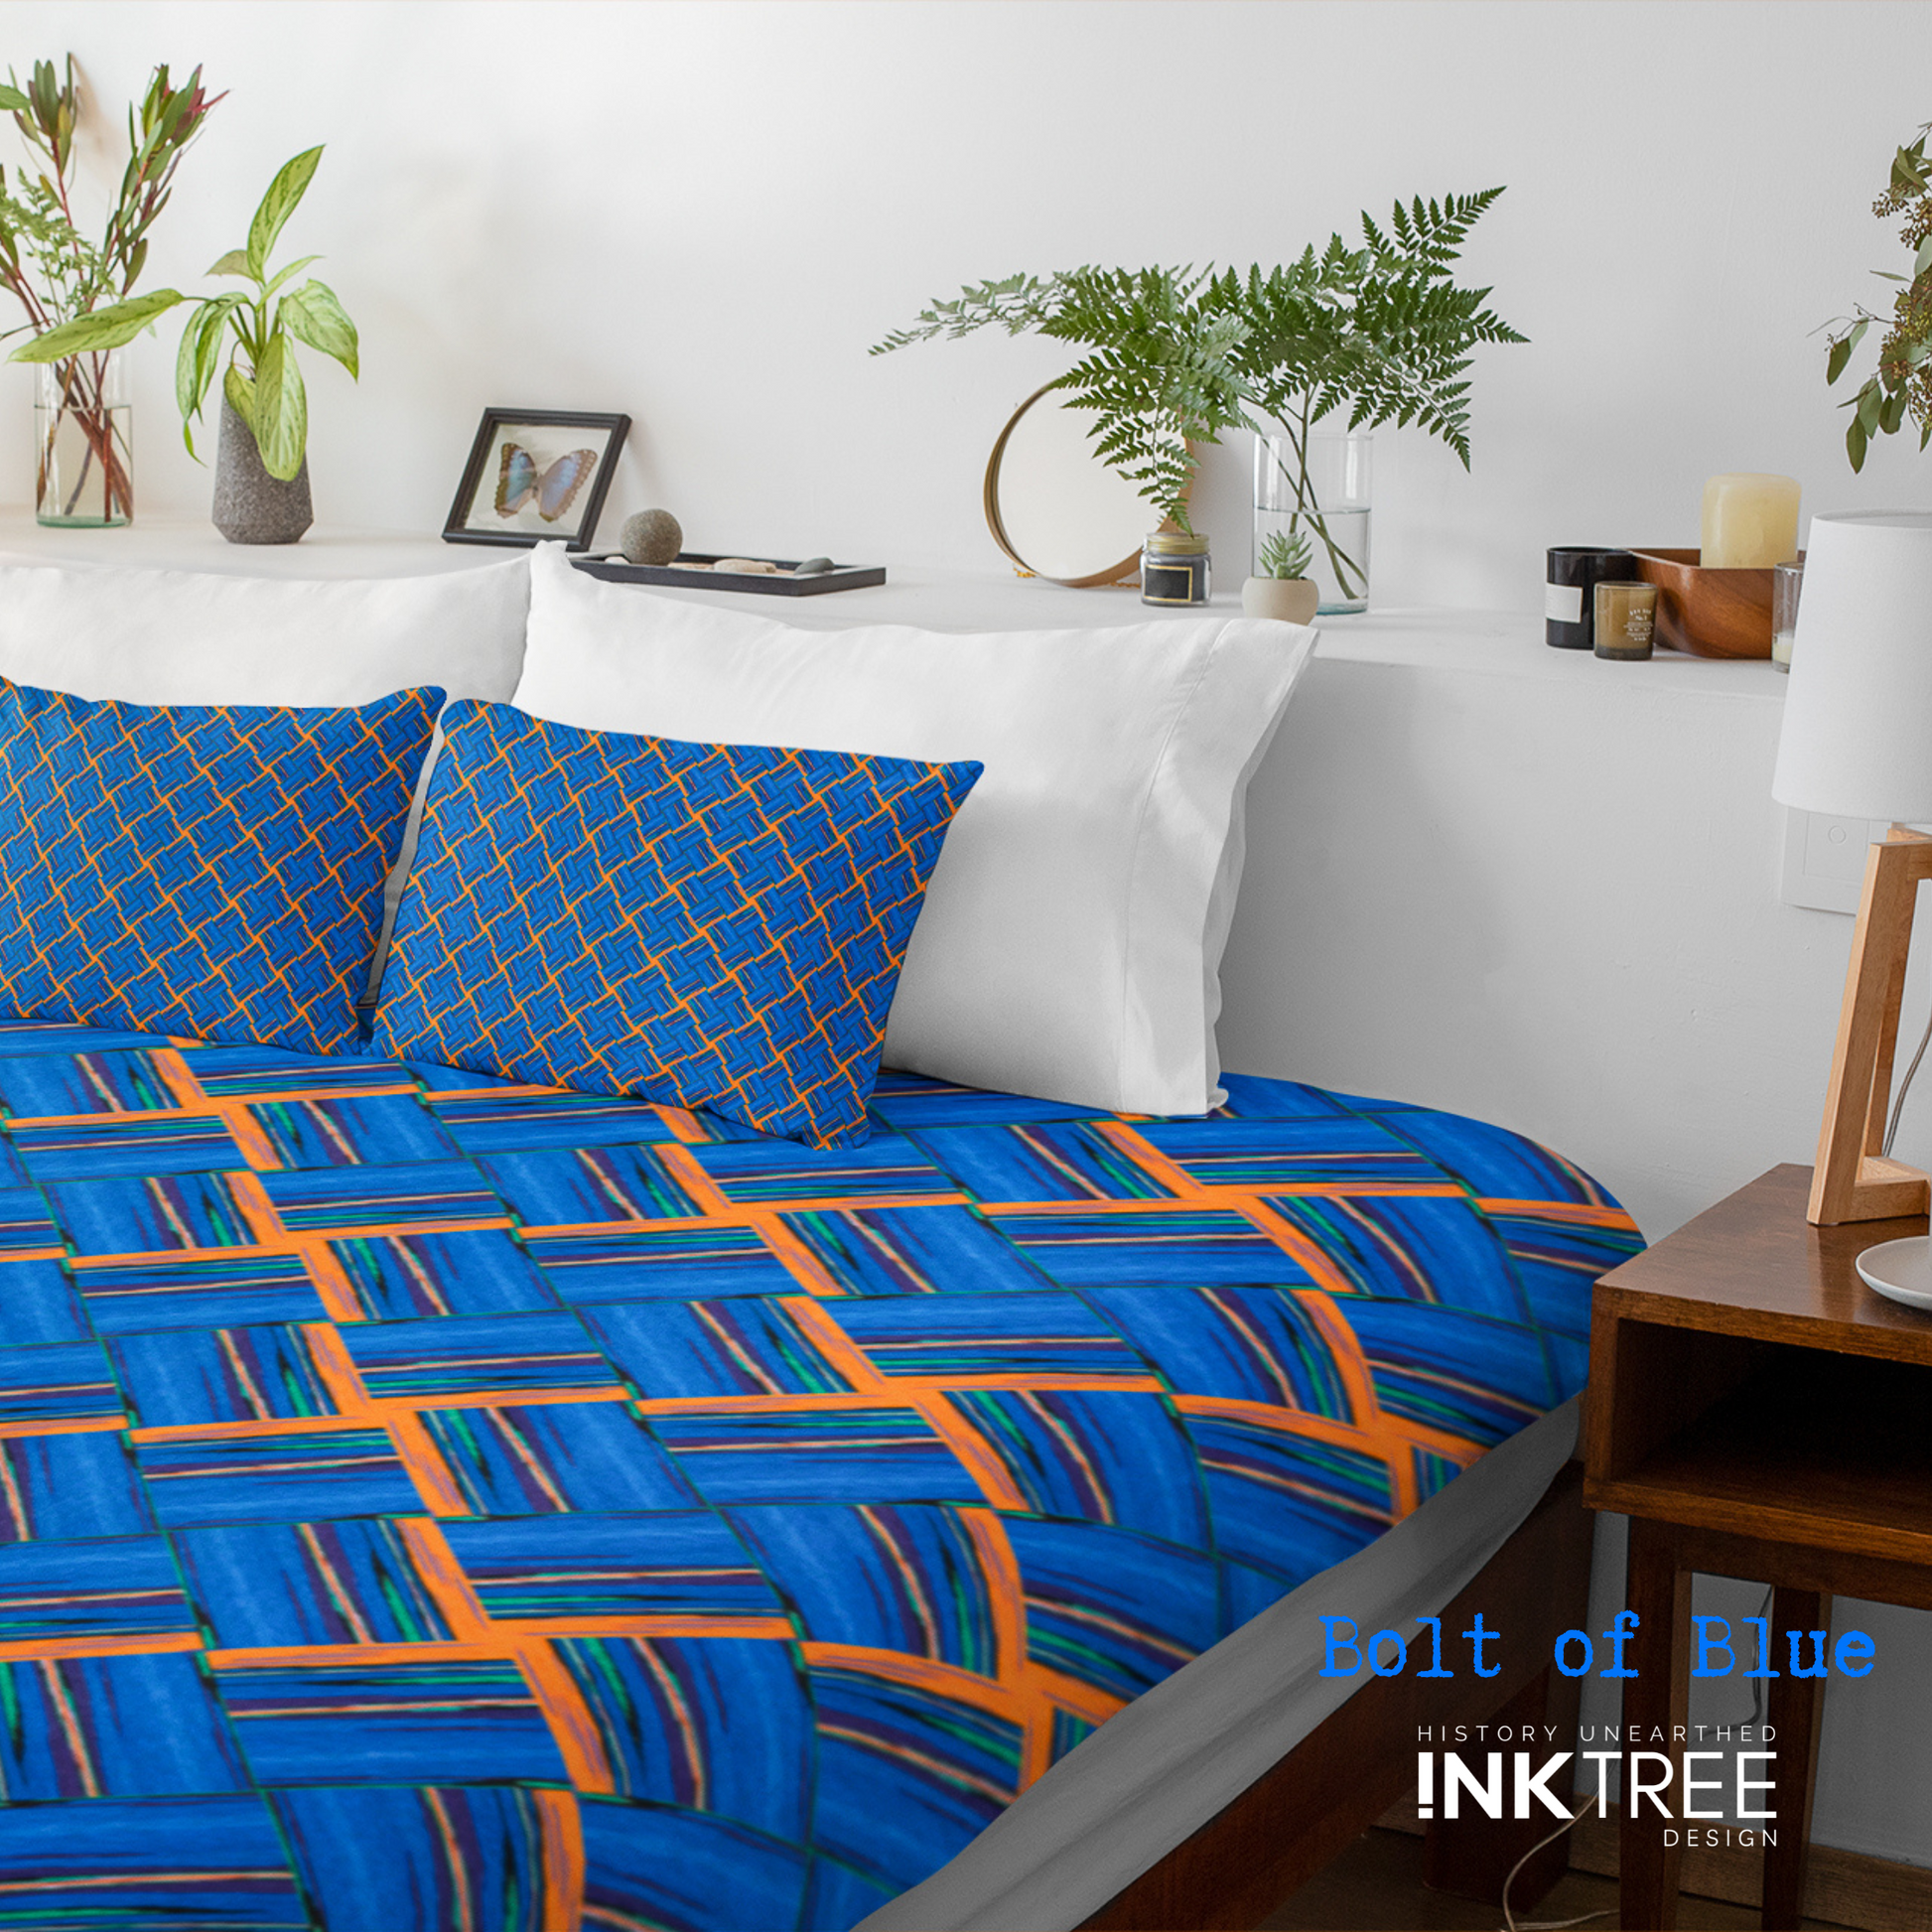 A doona cover and front pillows with an orange, white, black, blue and green square pattern on a bed with a white wall, white pillows and white backboard background. There is a lamp with a white shade and wood base and plants and a small round metal mirror on the back board. There is also a bolt of blue, history unearthed ink tree design logo in the bottom right hand corner on it.